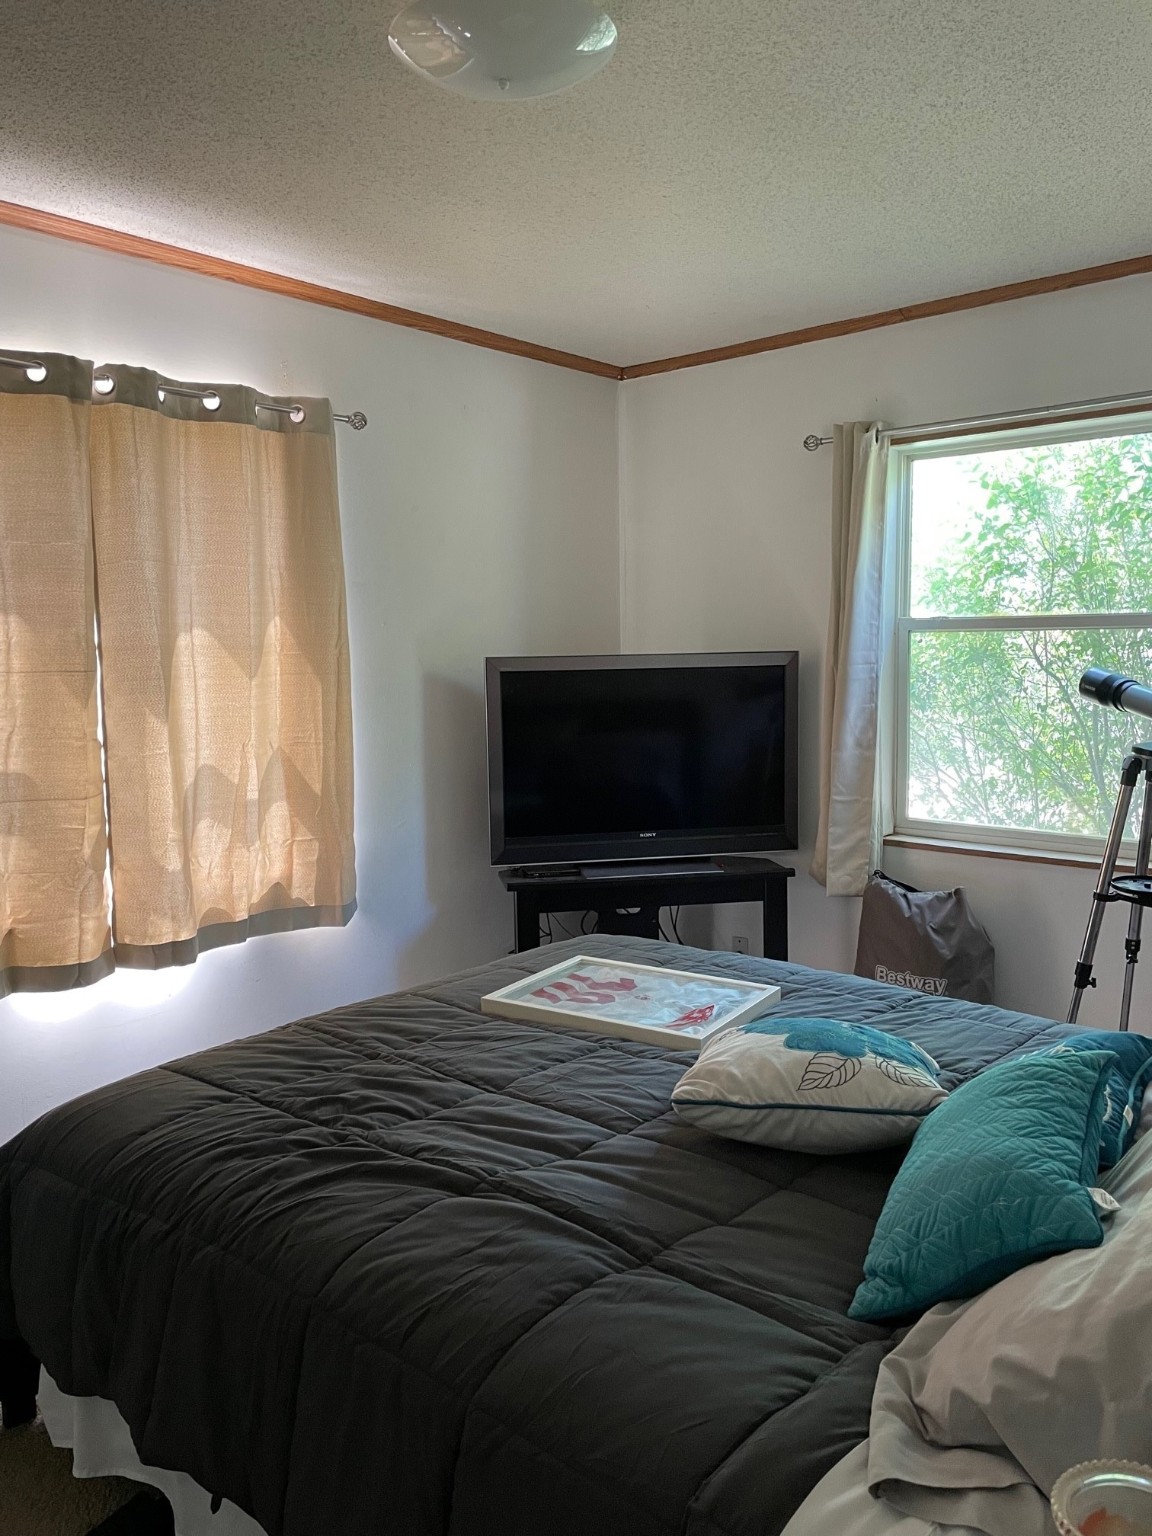 2109 N McCurdy Road B, Espanola, New Mexico 87532, 3 Bedrooms Bedrooms, ,2 BathroomsBathrooms,Residential,For Sale,2109 N McCurdy Road B,202338219